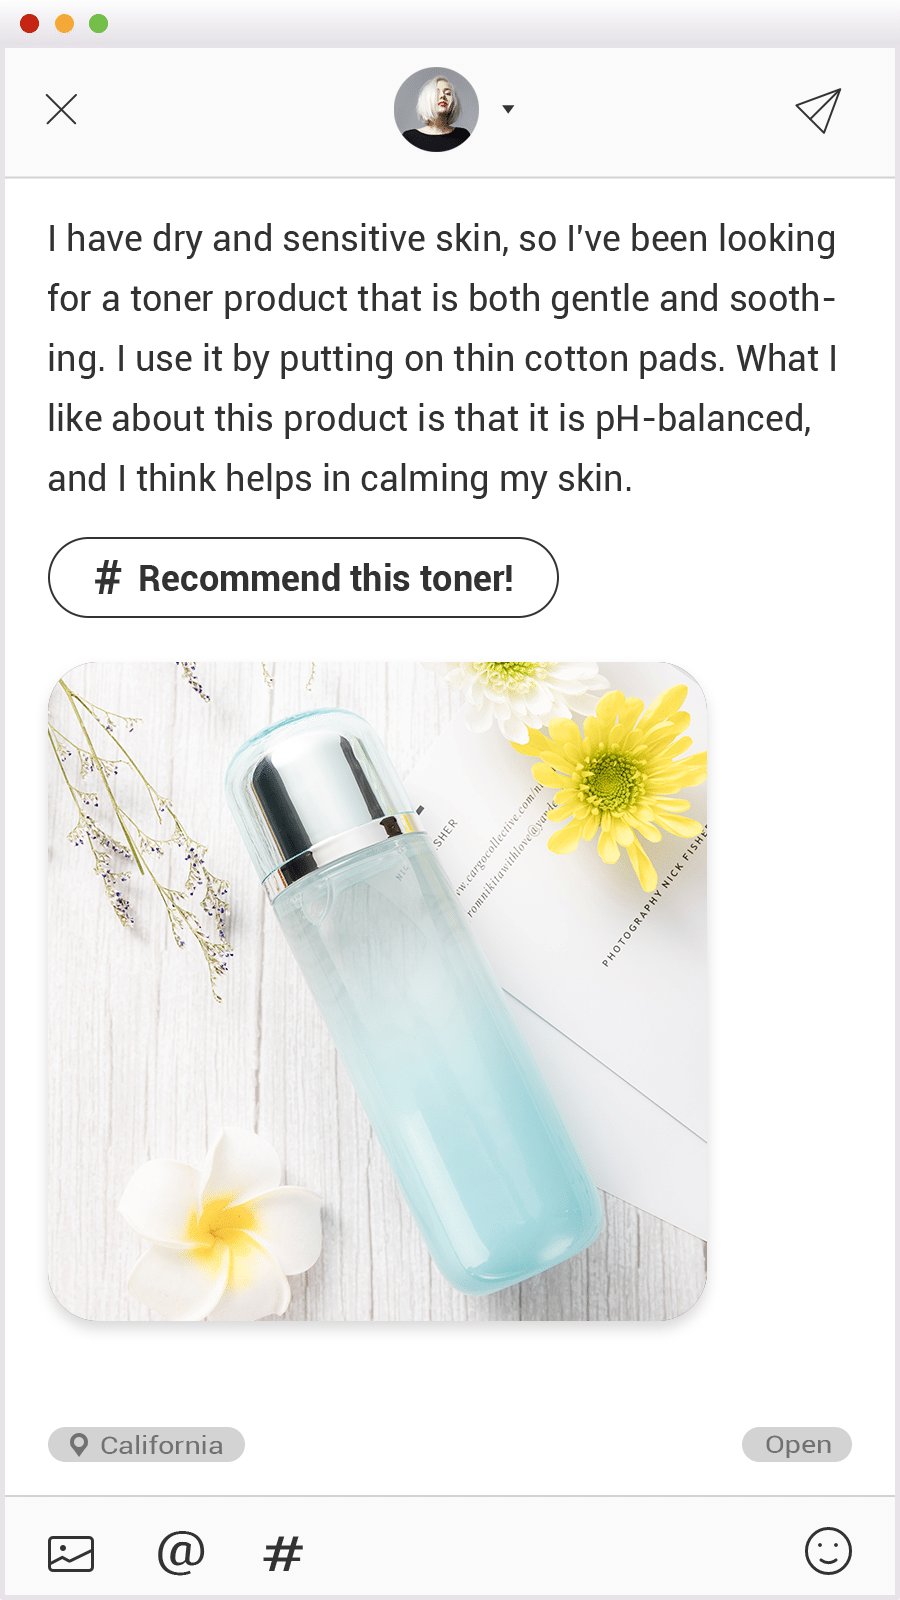 Skincare Facial Toner Product Review Customer Feedback Ecommerce Story预览效果